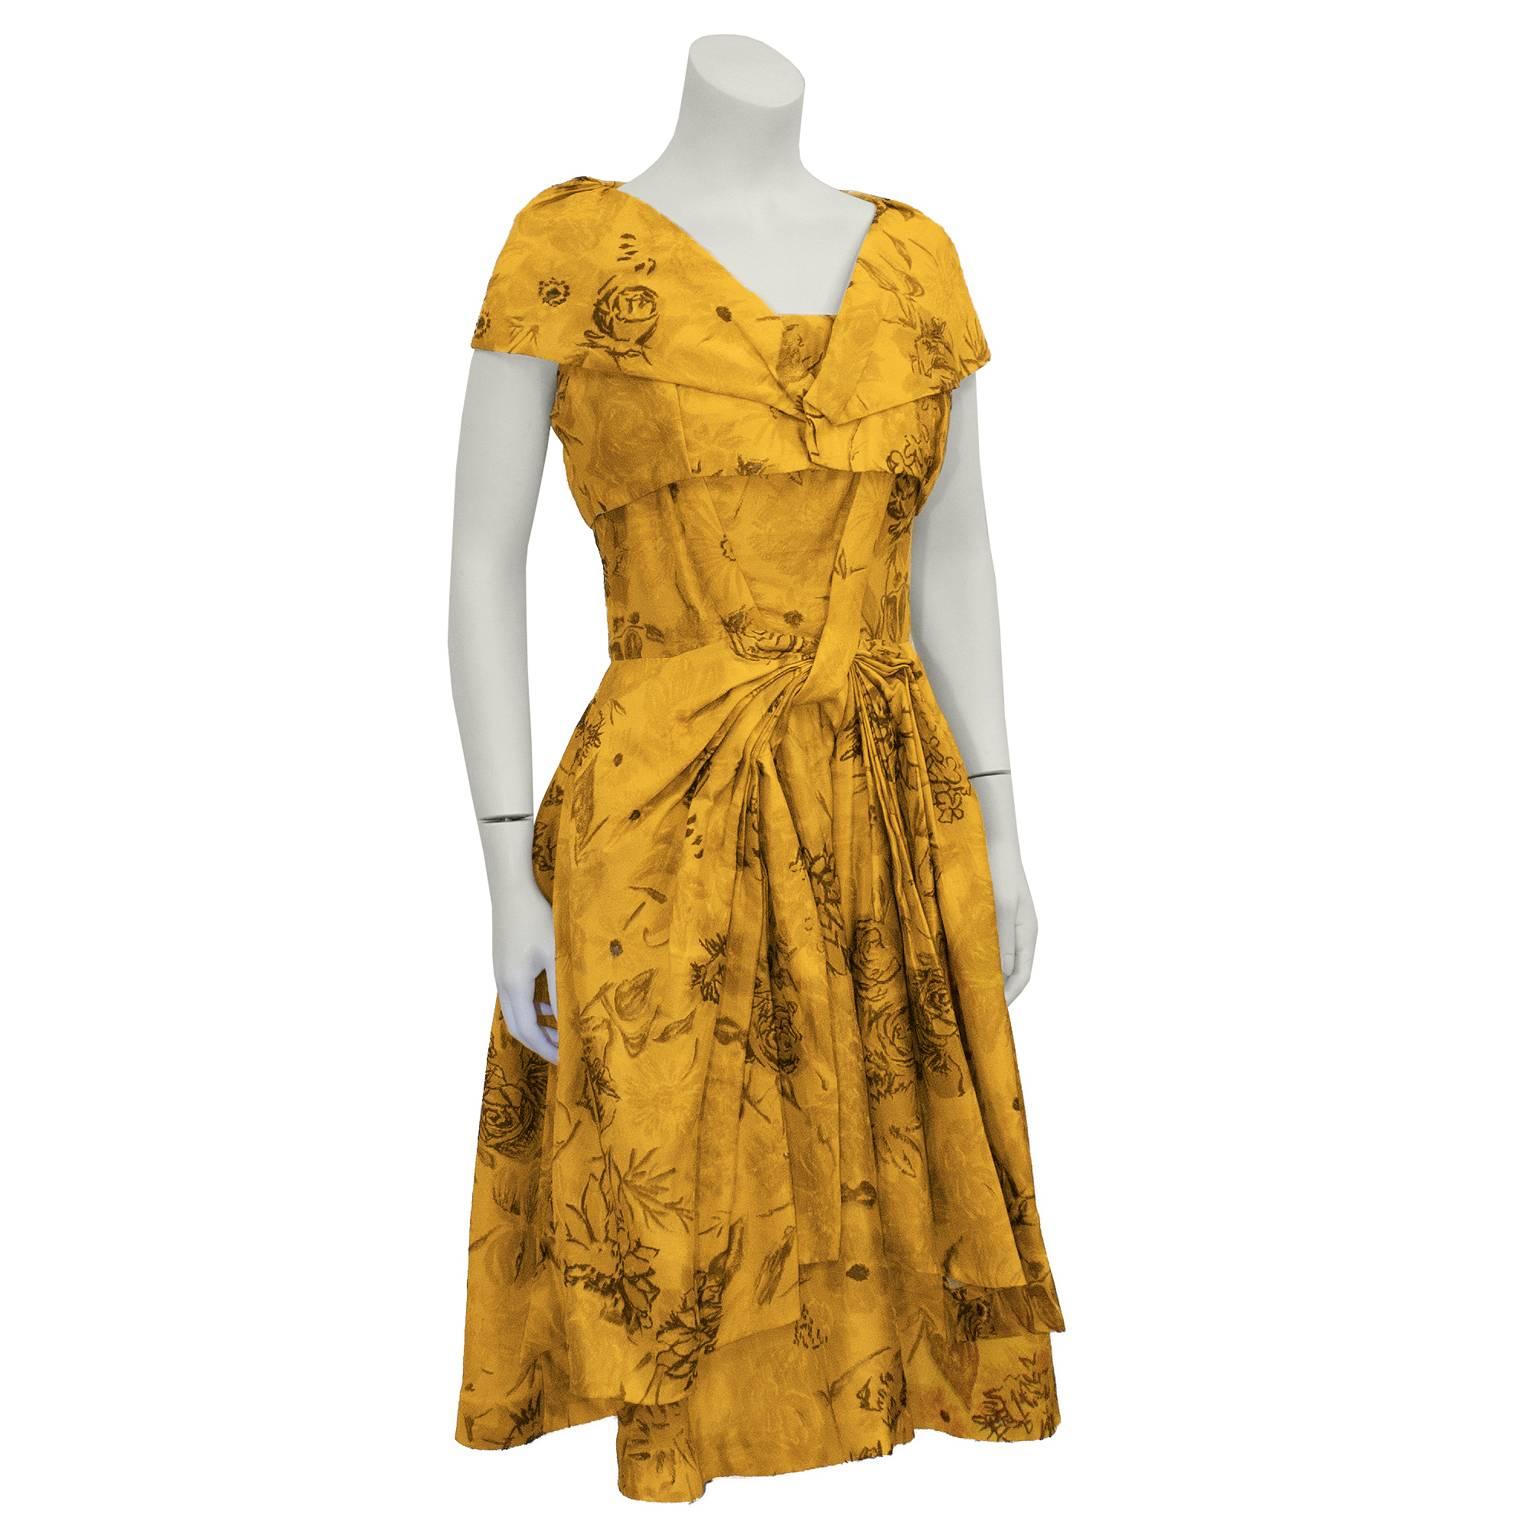 Adorable printed silk Suzy Perette dress from the 1950's, with a silhouette inspired by Dior's 'New Look'. Vibrant marigold color with a unique floral pattern, with brown details. Detachable mini bolero no longer available.  Cinched at the waist,